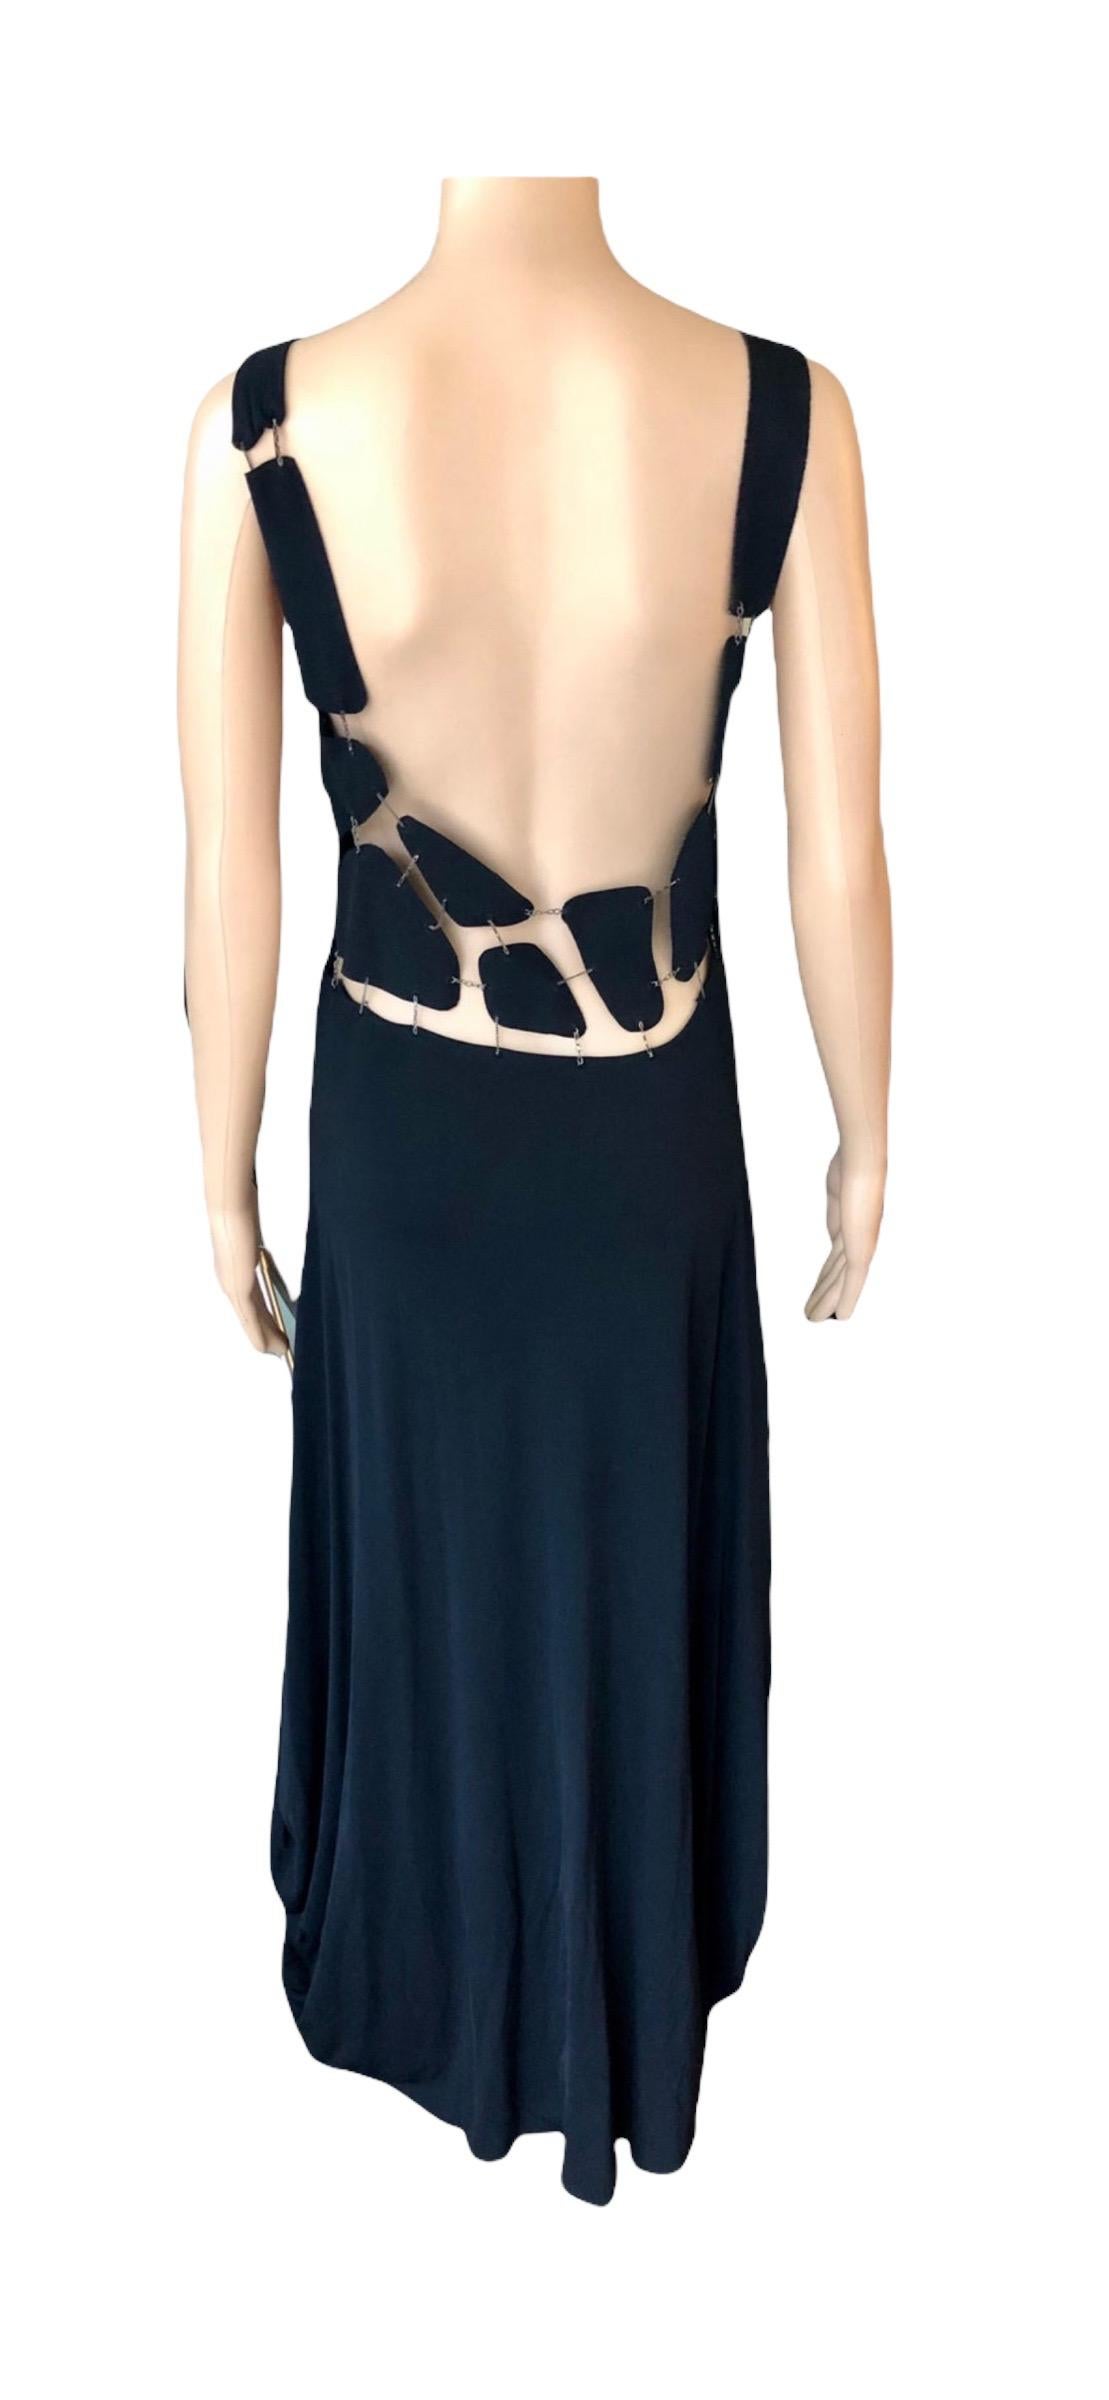 Jean Paul Gaultier S/S 2003 Chain Embellished Open Back Black Evening Dress Gown For Sale 5